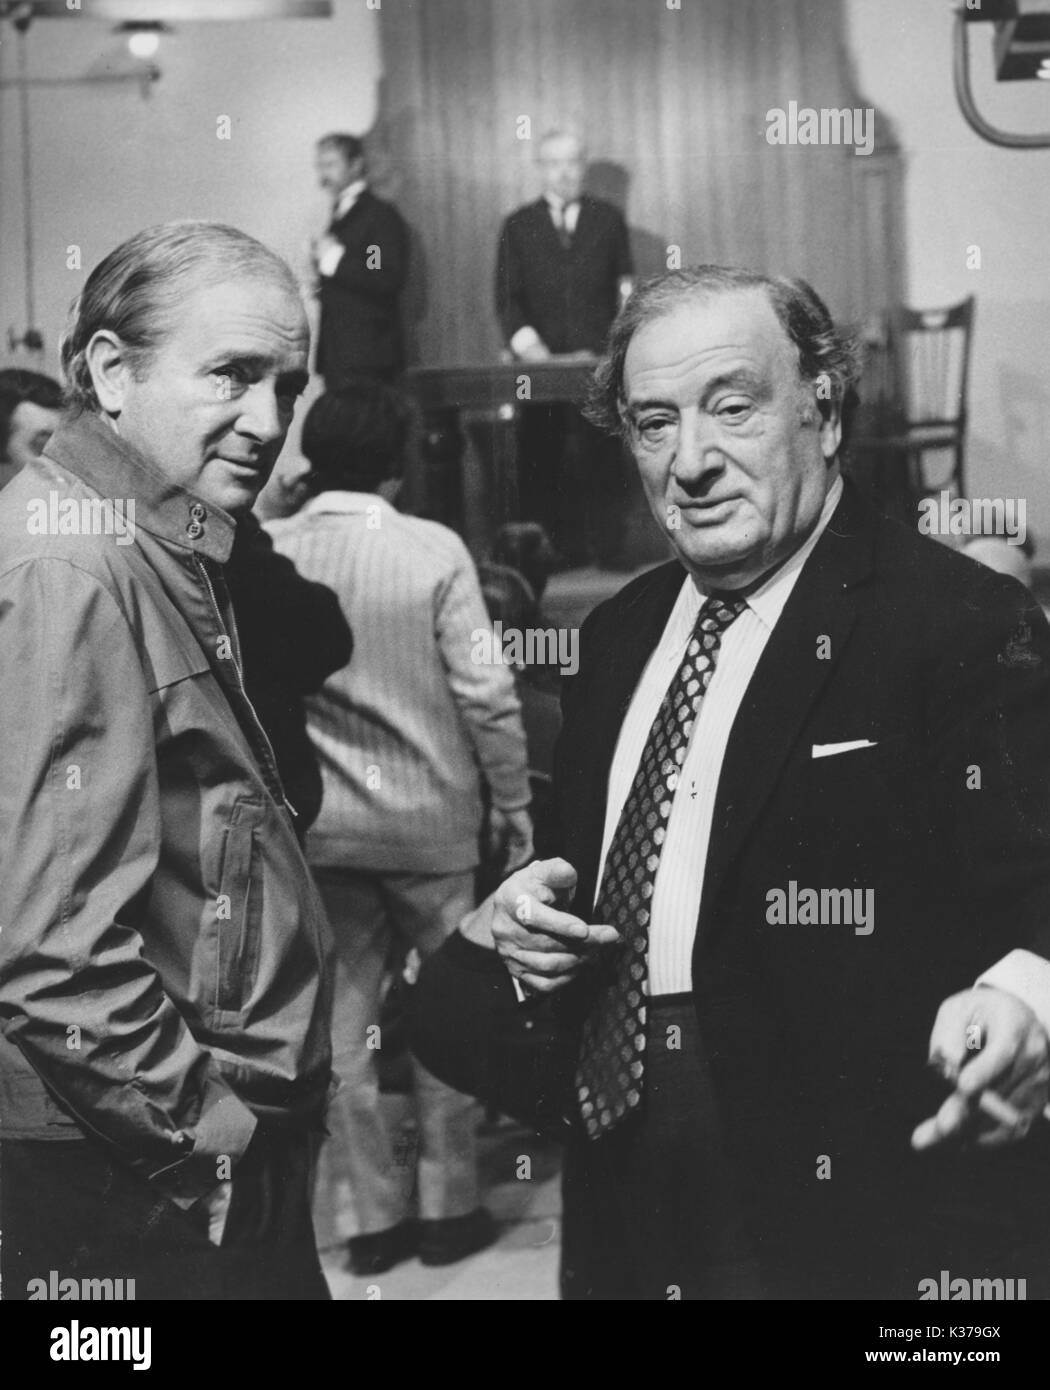 DIRECTOR FRANKLIN J SCHAFFNER AND PRODUCER SAM SPIEGEL ON THE SET OF NICHOLAS AND ALEXANDRA IN 1970 PICTURE FROM THE RONALD GRANT ARCHIVE Stock Photo